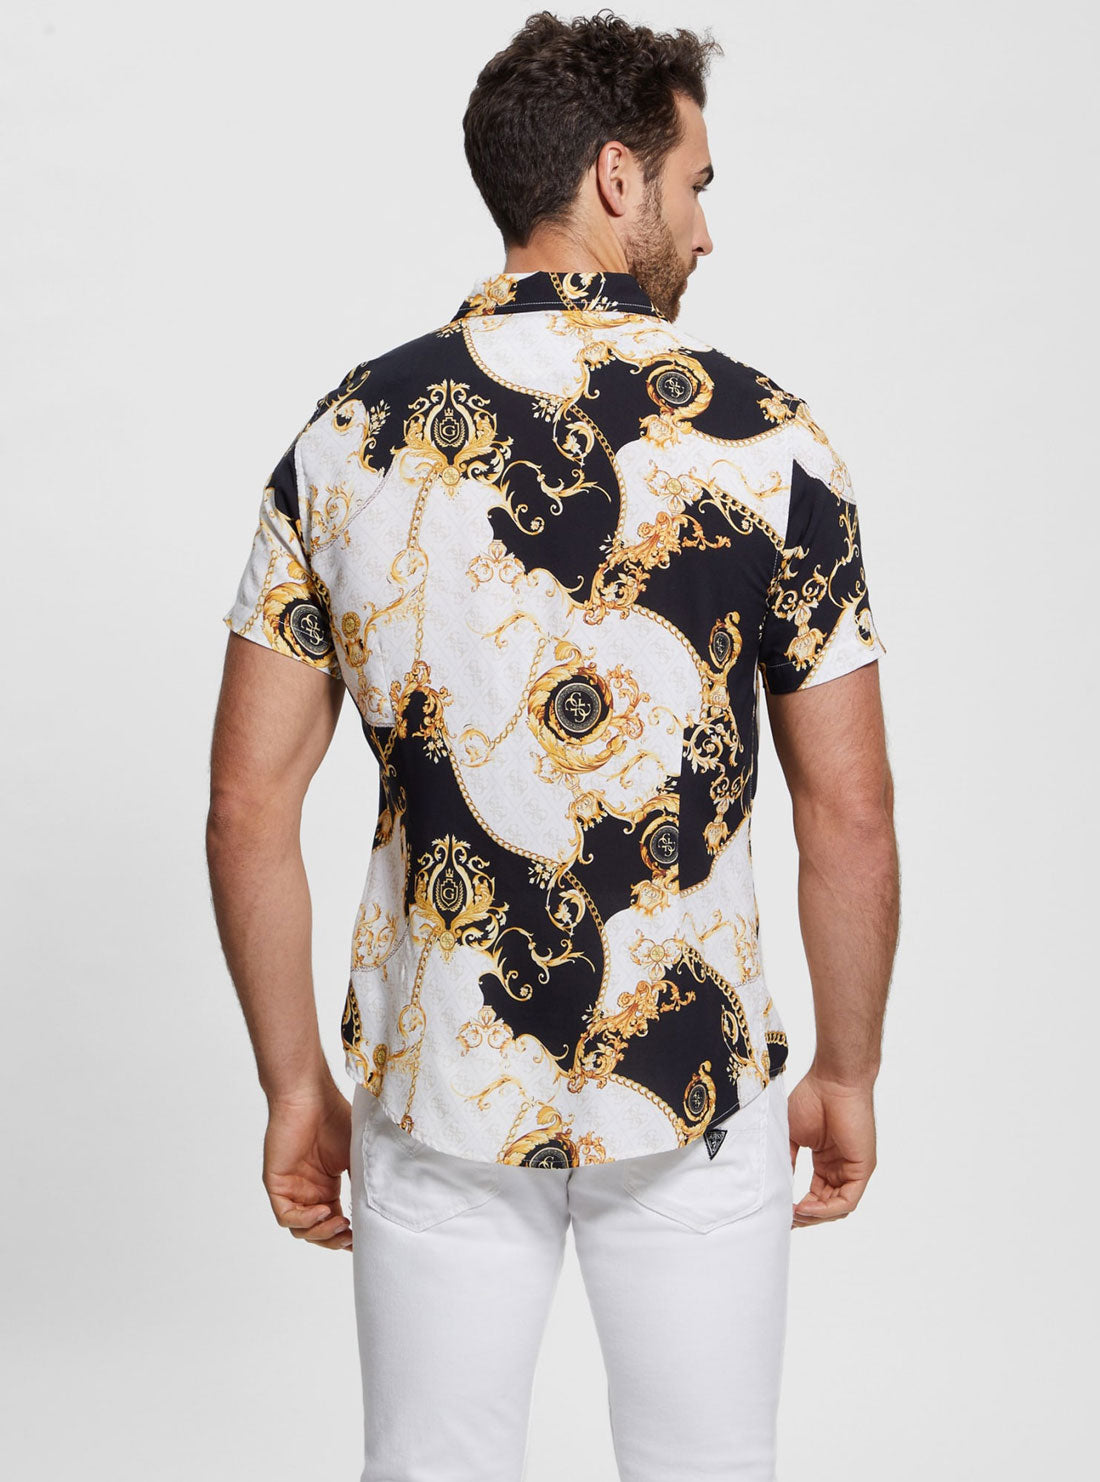 GUESS Eco Gold Chain Print Short Sleeve Shirt back view